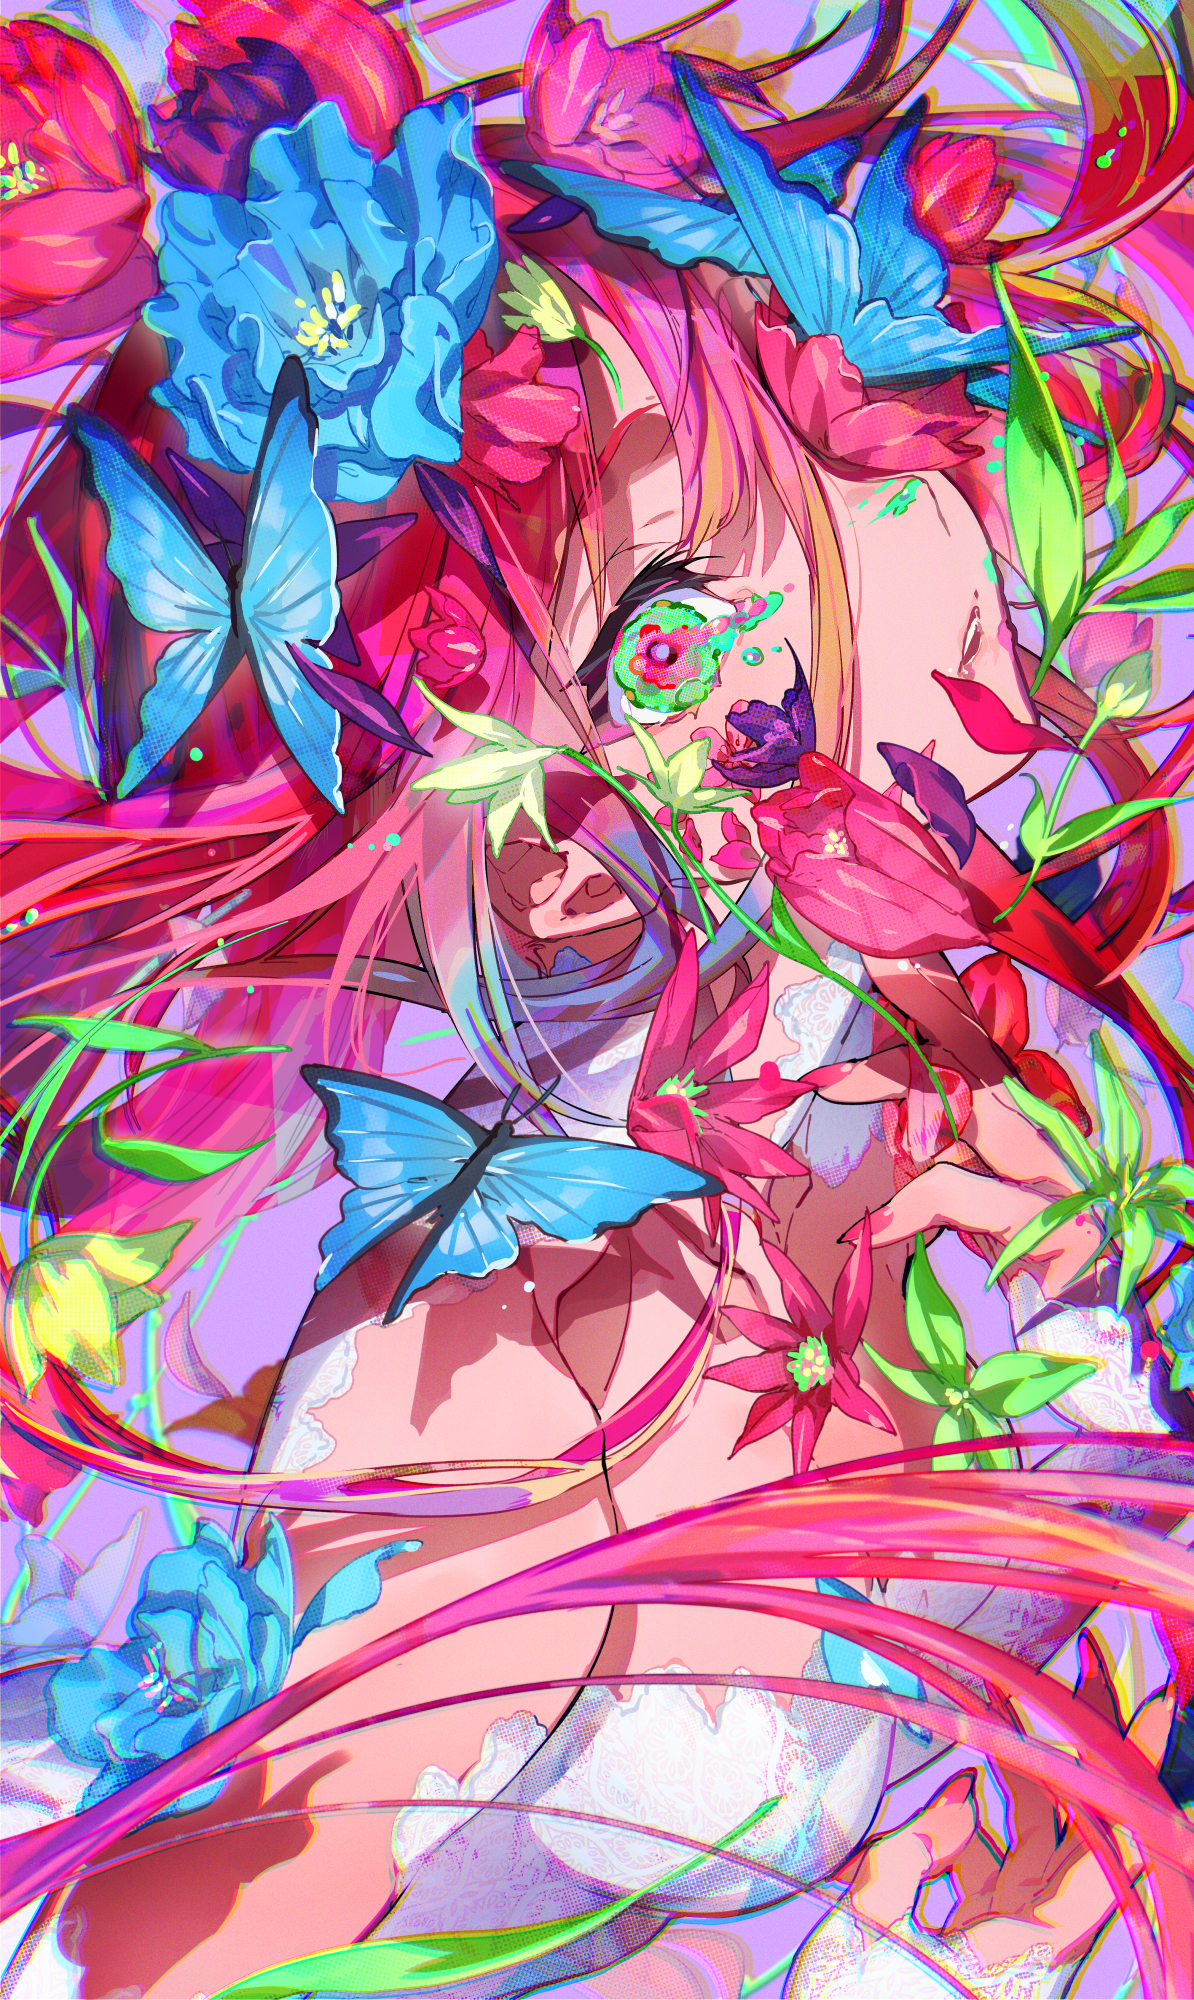 Anime 1194x2000 mika pikazo anime girls butterfly colorful portrait display flowers